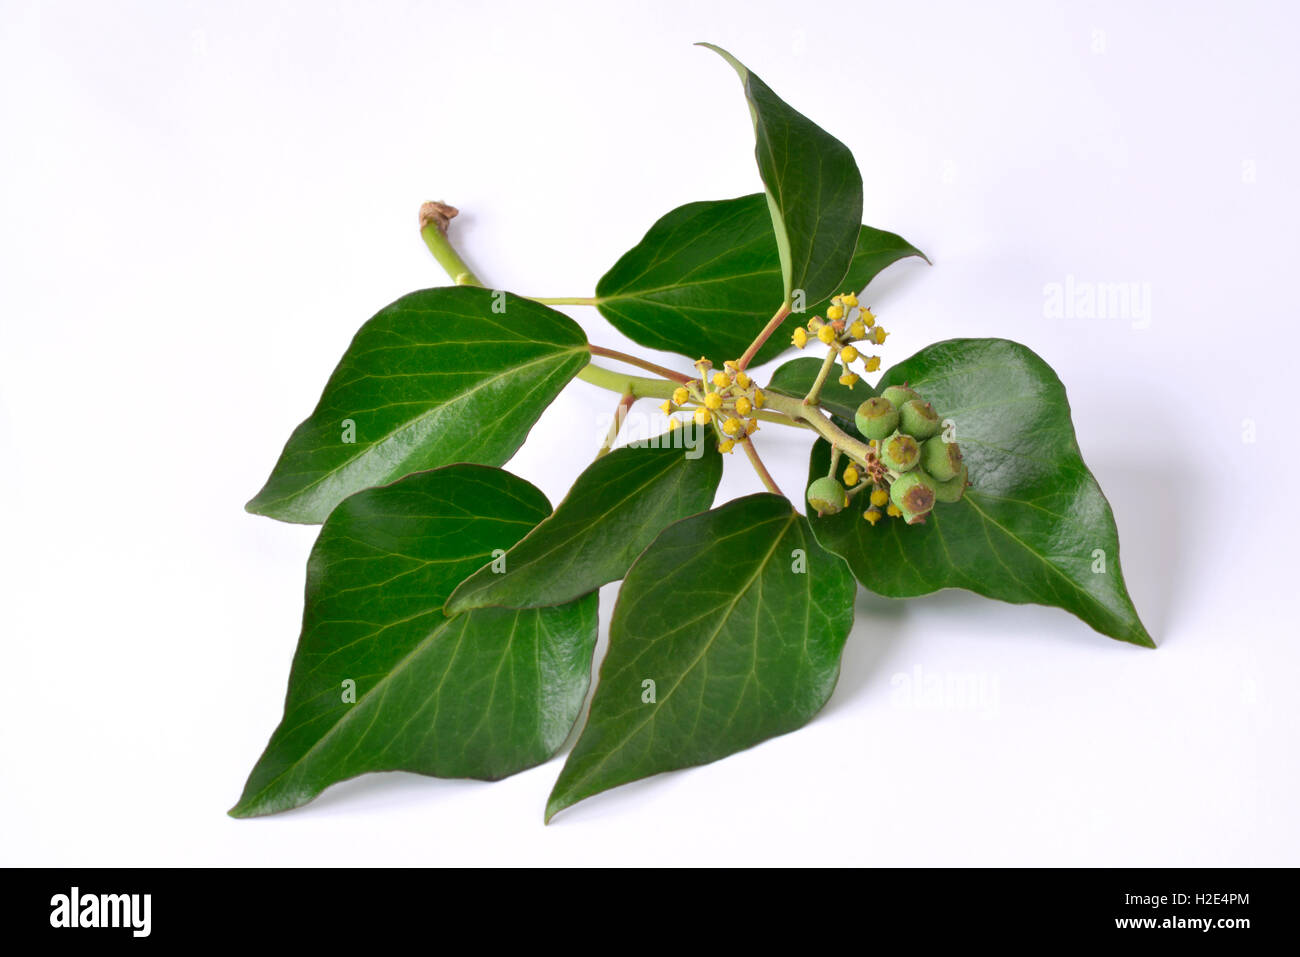 Common Ivy (Hedera helix). Flowering shoot with unripe fruit. Studio picture against a white background Stock Photo